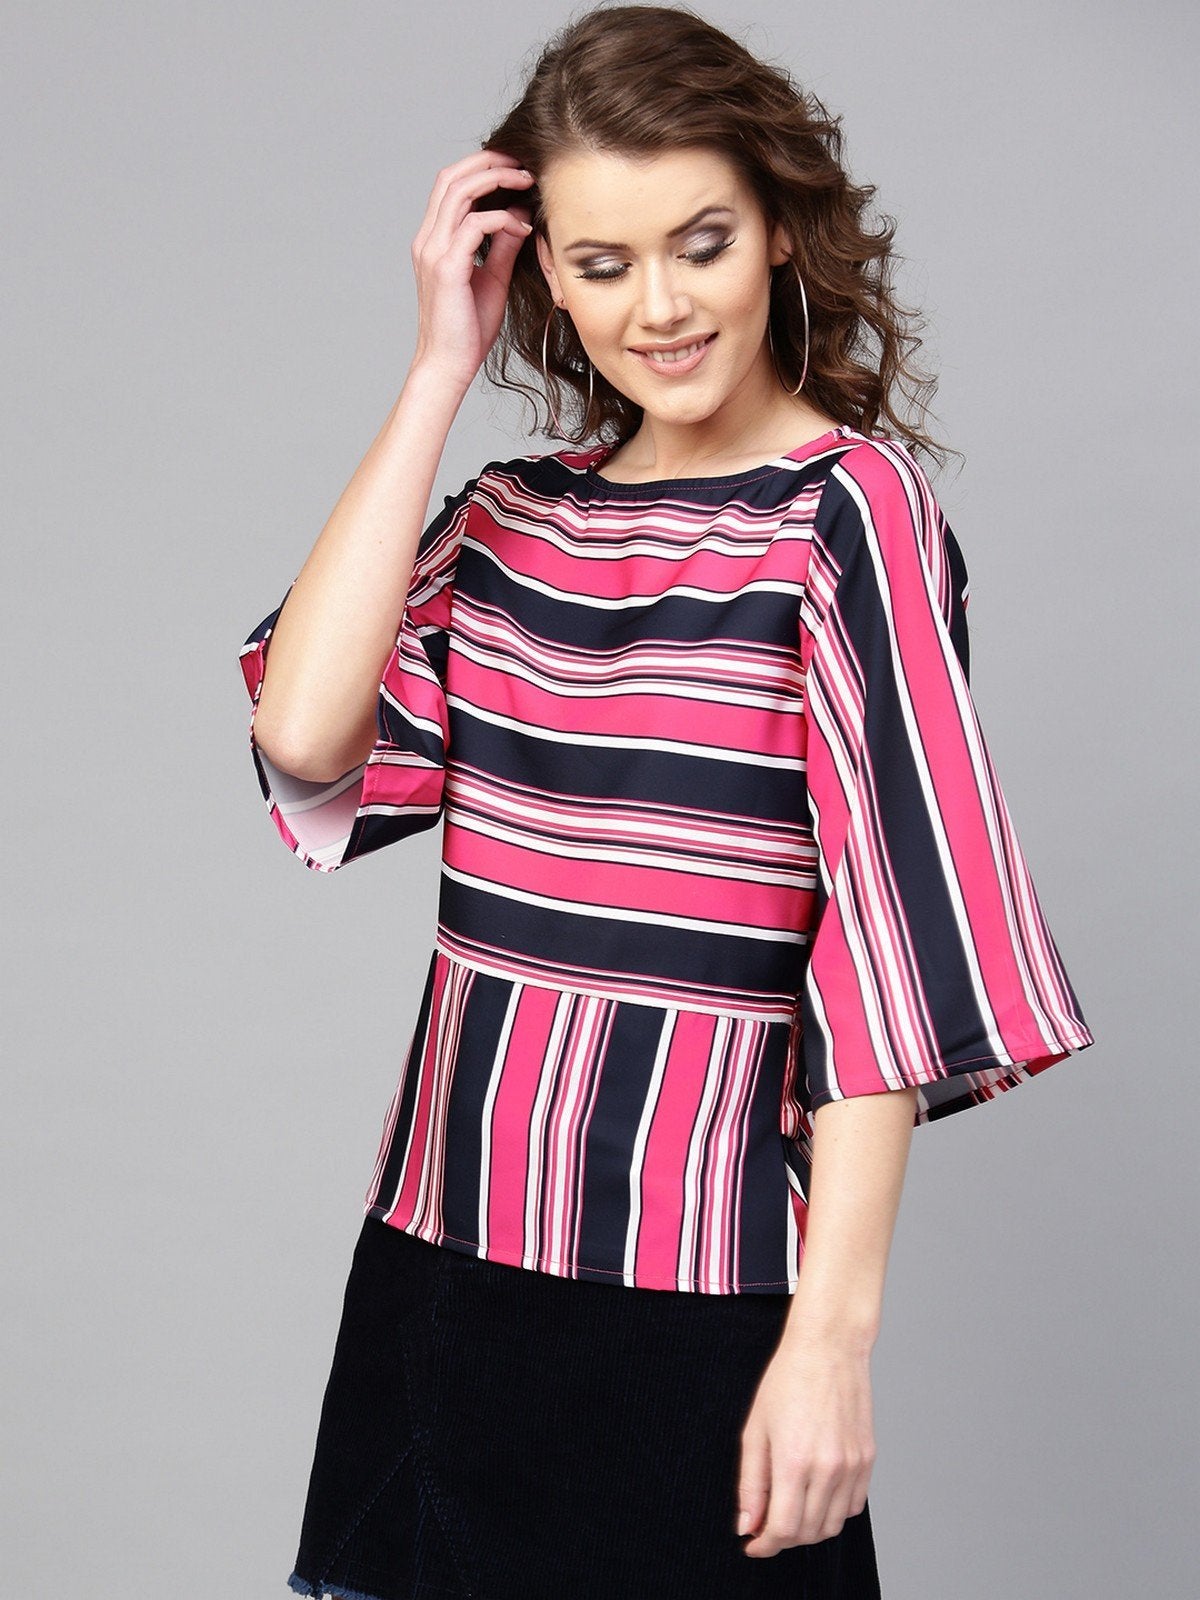 Women's Printed Stripes Tie-Up Top - Pannkh